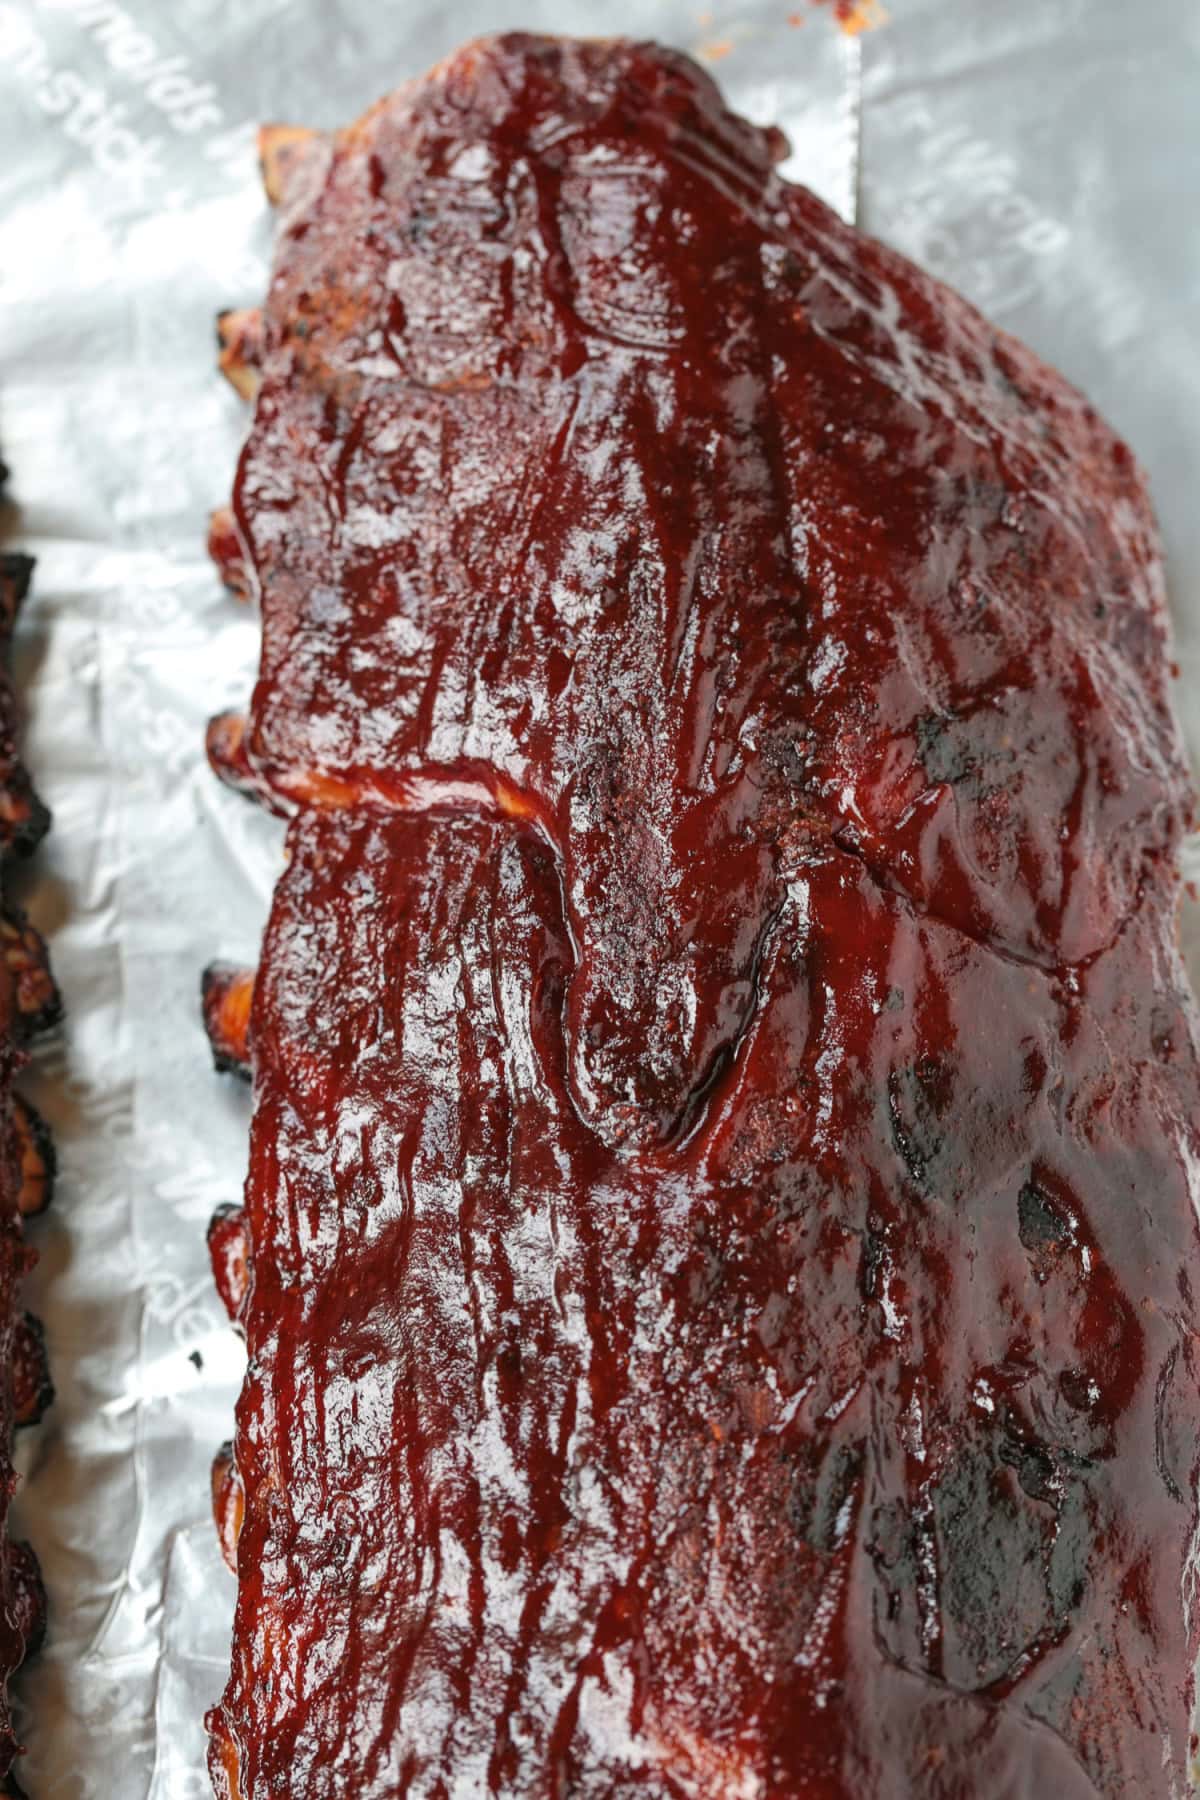 slab of barbecue ribs on foil